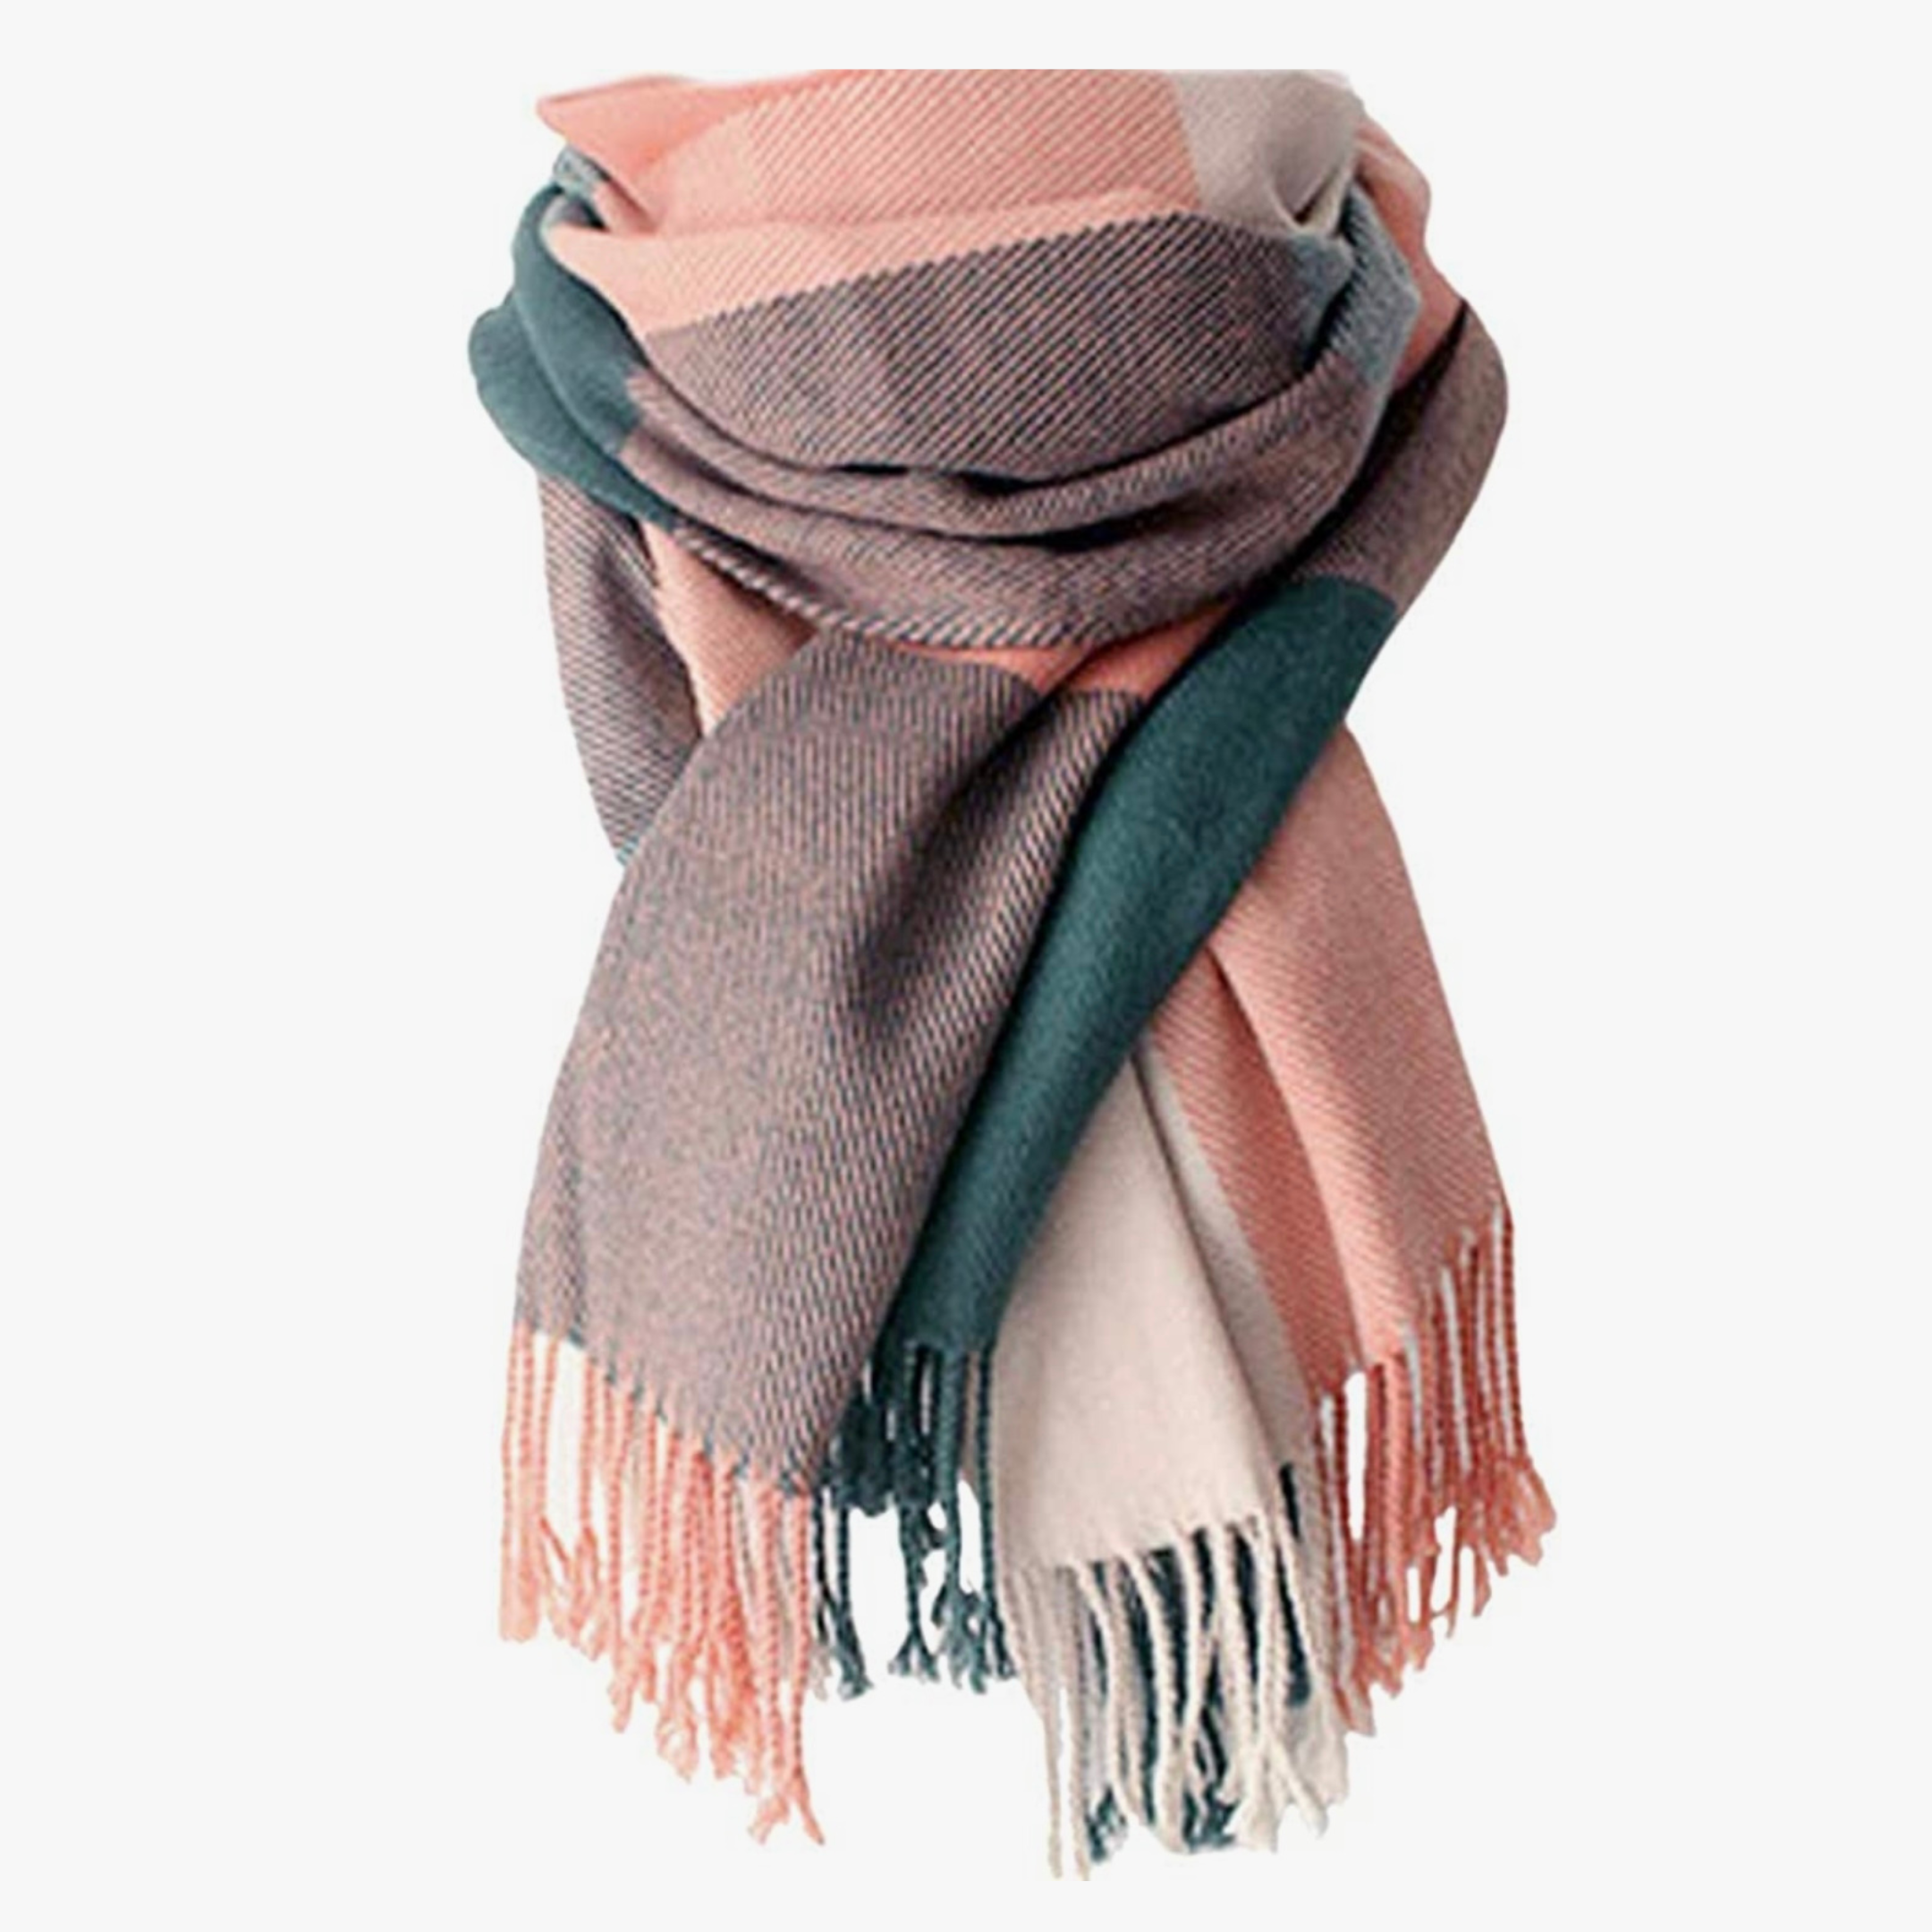 11 Scarves For All Your Fall And Winter Wardrobe Needs